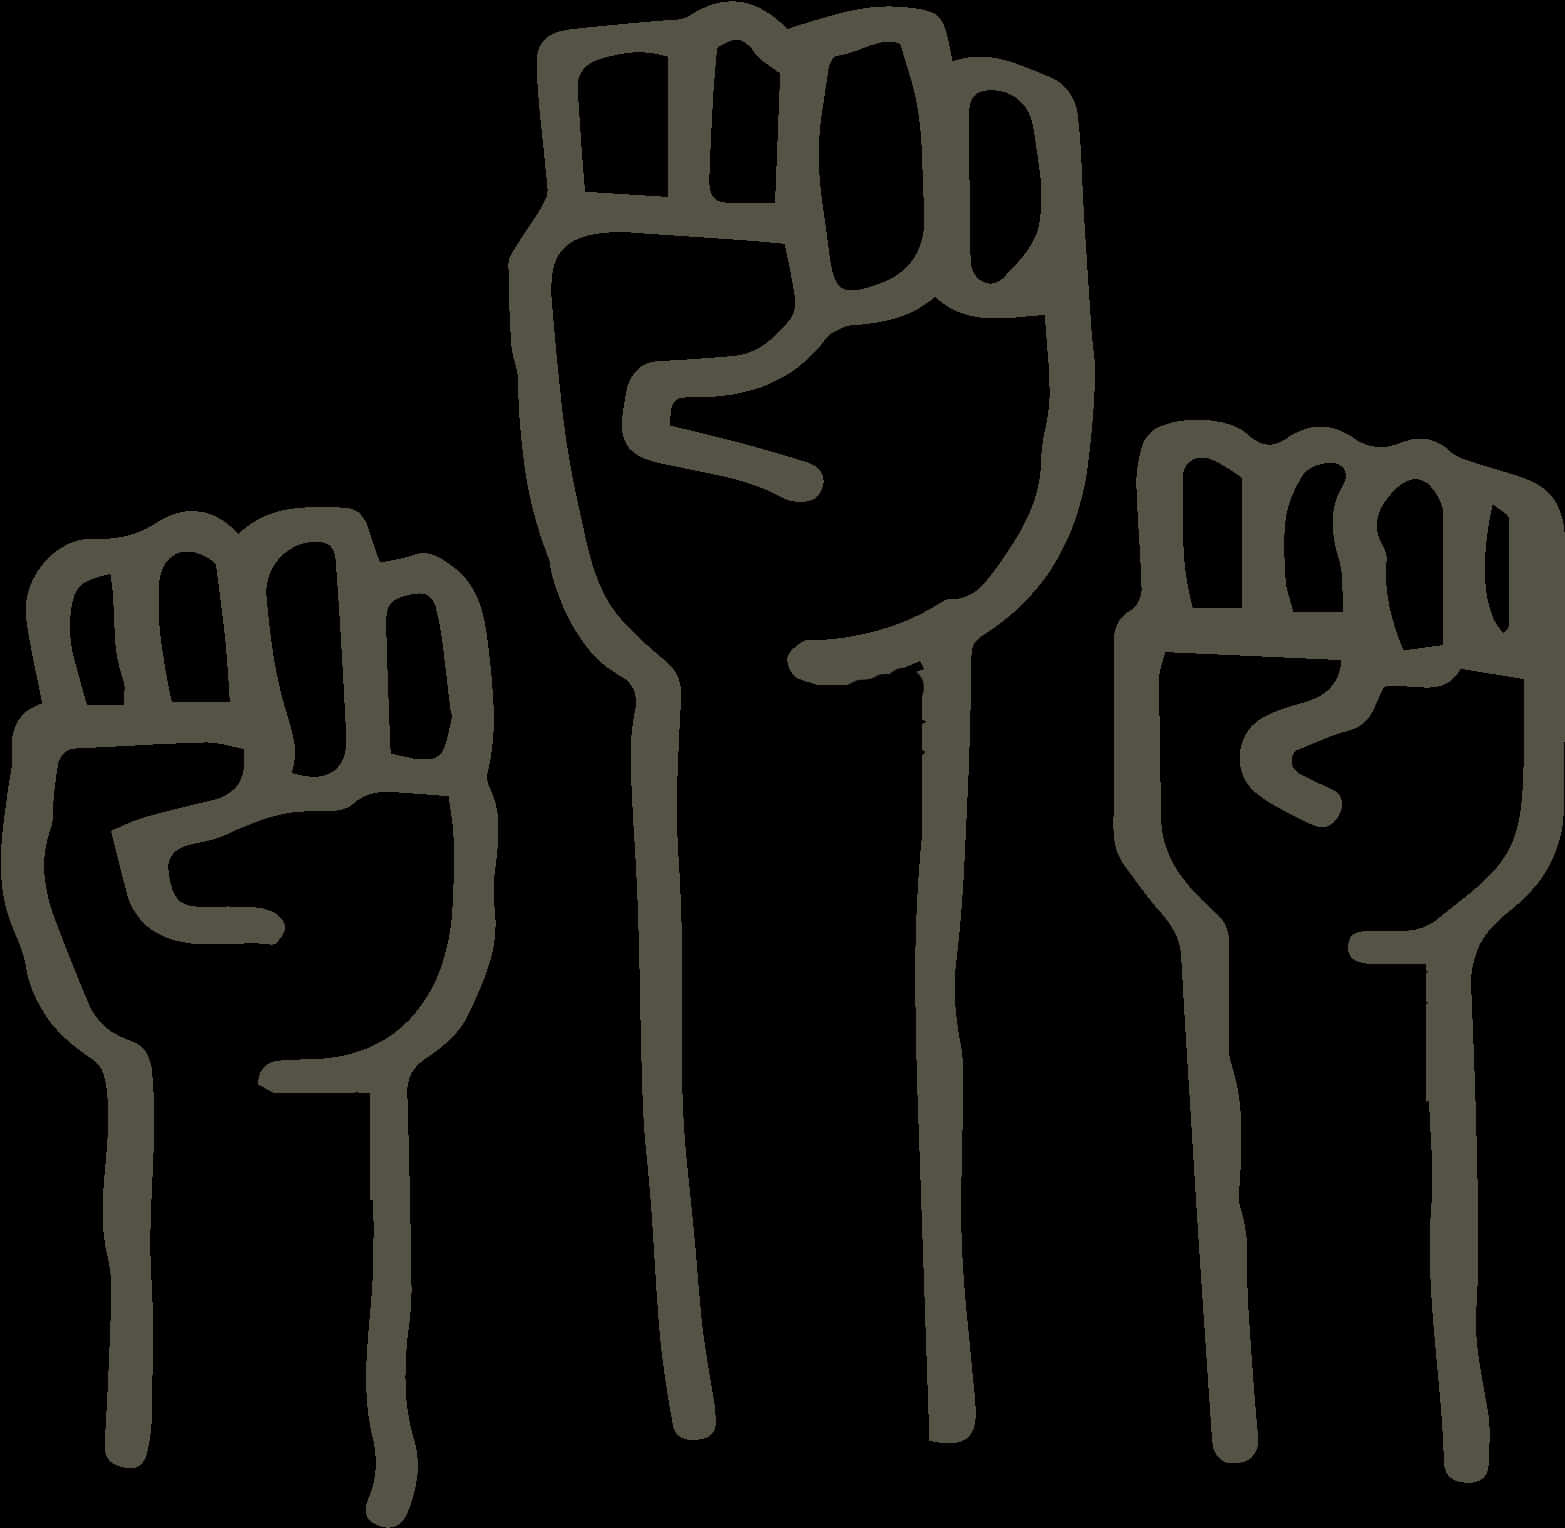 Raised Fists Silhouette Graphic PNG